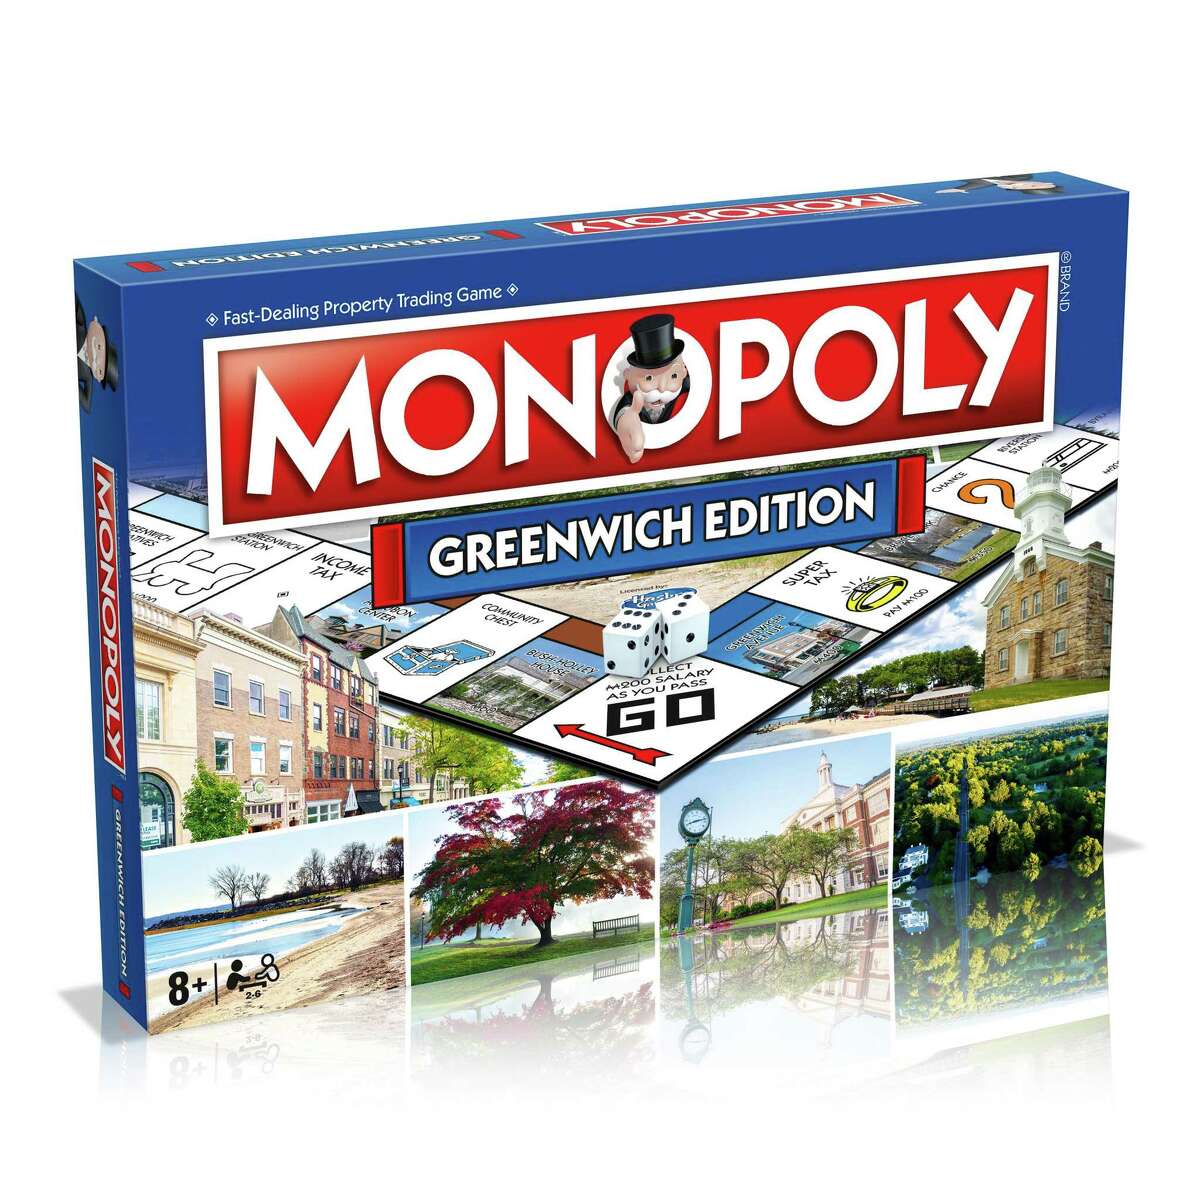 The Greenwich version of Monopoly is now available in stores with spots on the board suggested by residents reflecting favorite spots and events in town.